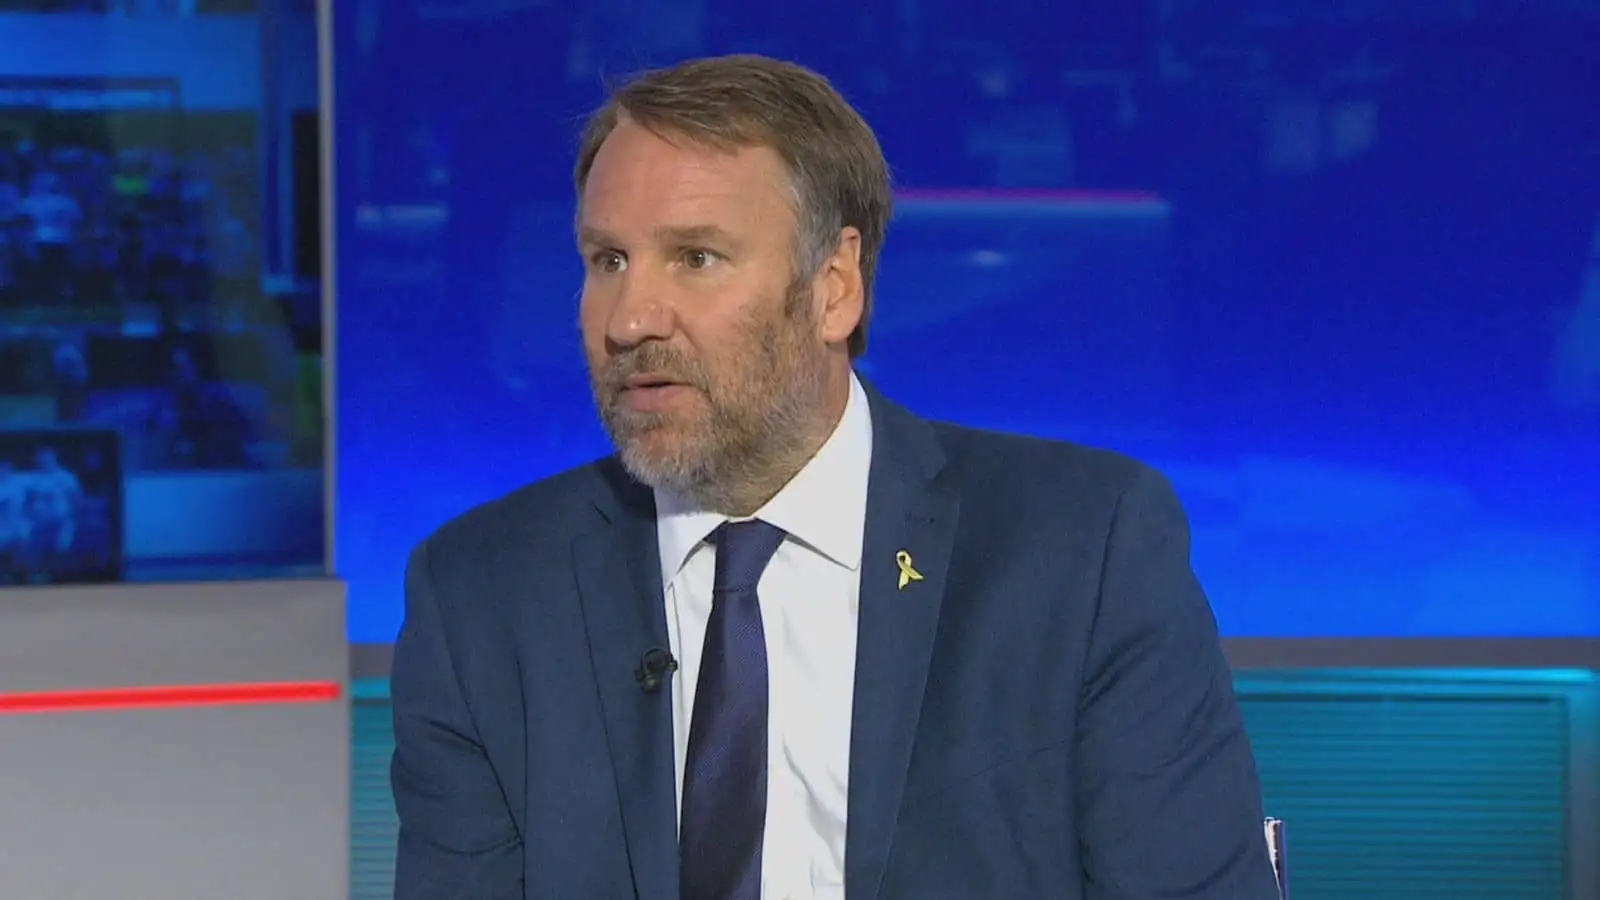 Paul Merson, former Arsenal star and Sky Sports pundit